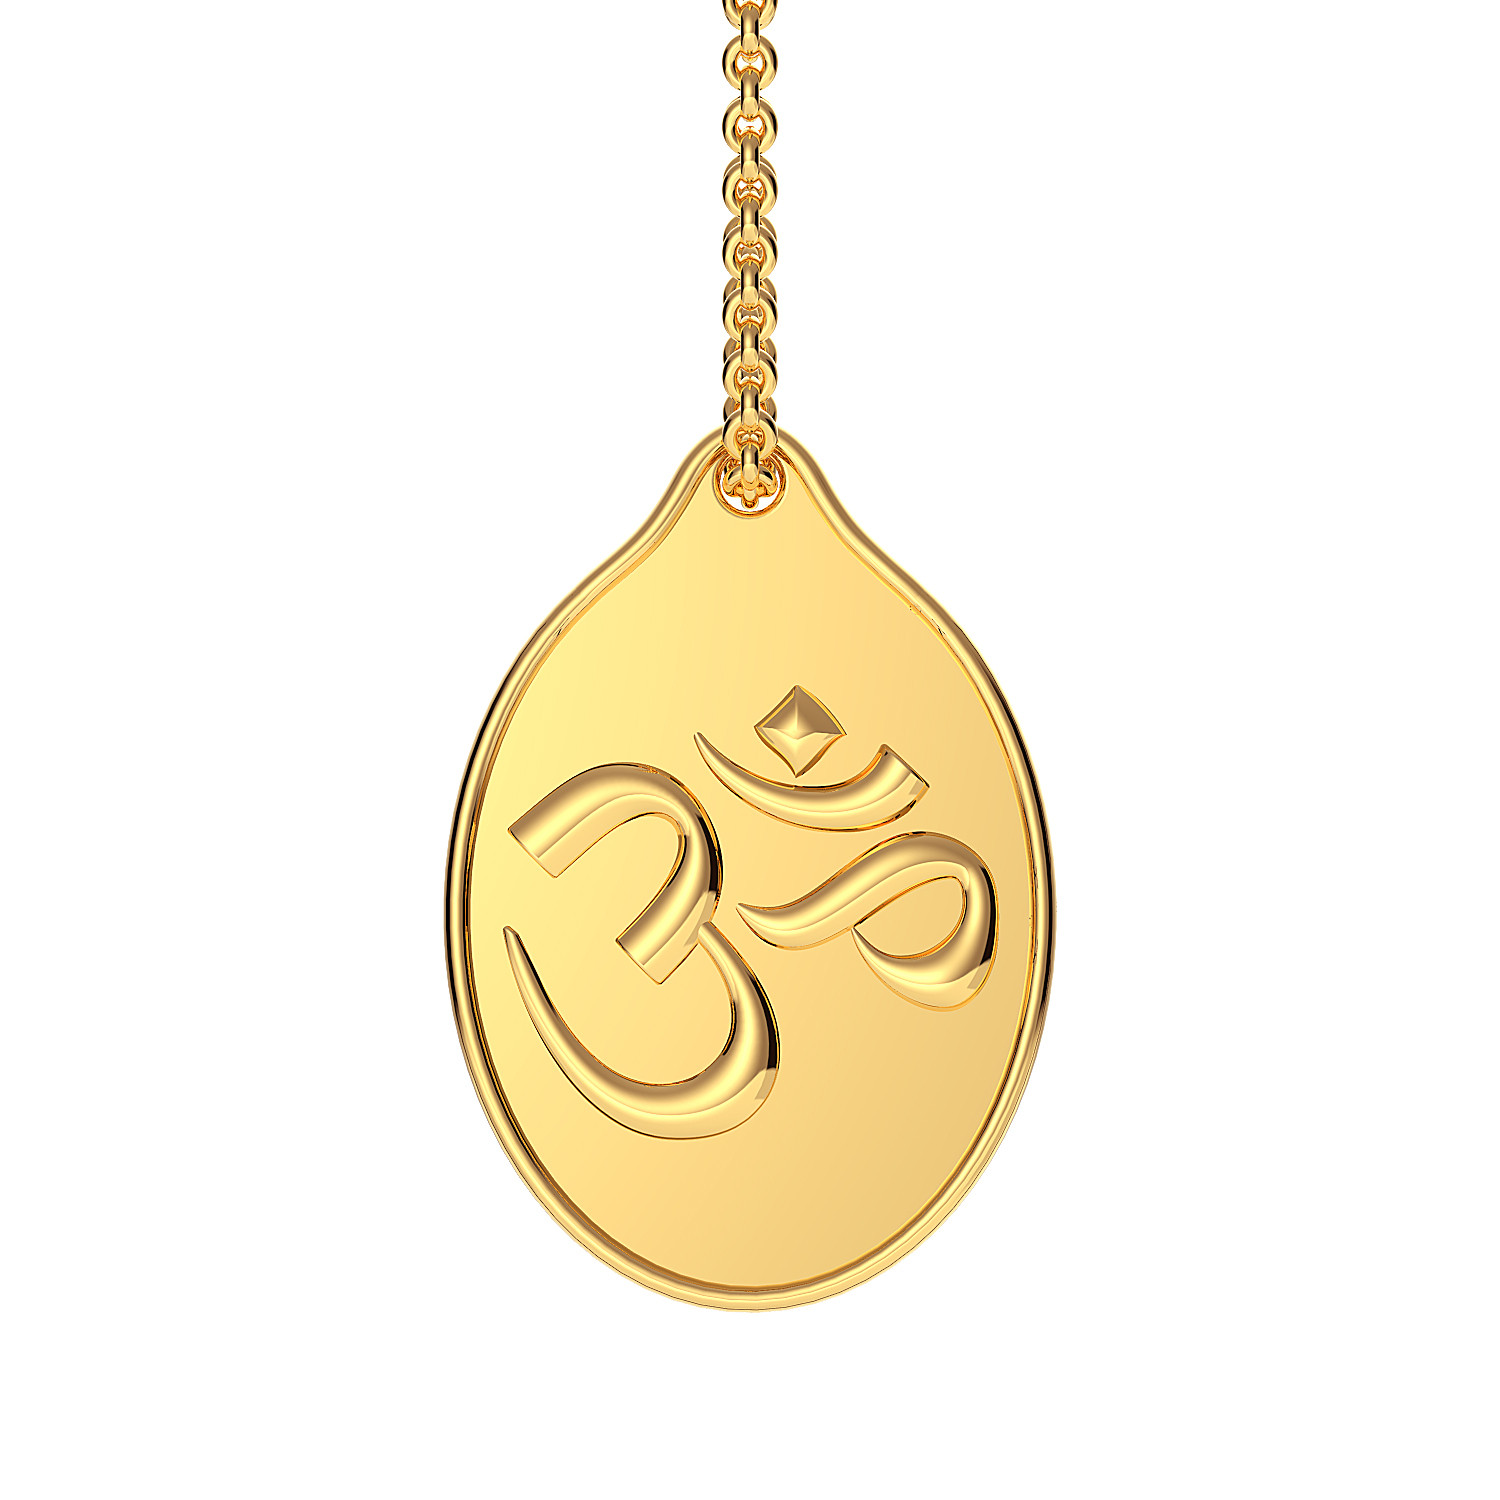 999 Purity 3.5 Grams OM Impression Gold Coin Pendant PDOM999P305G